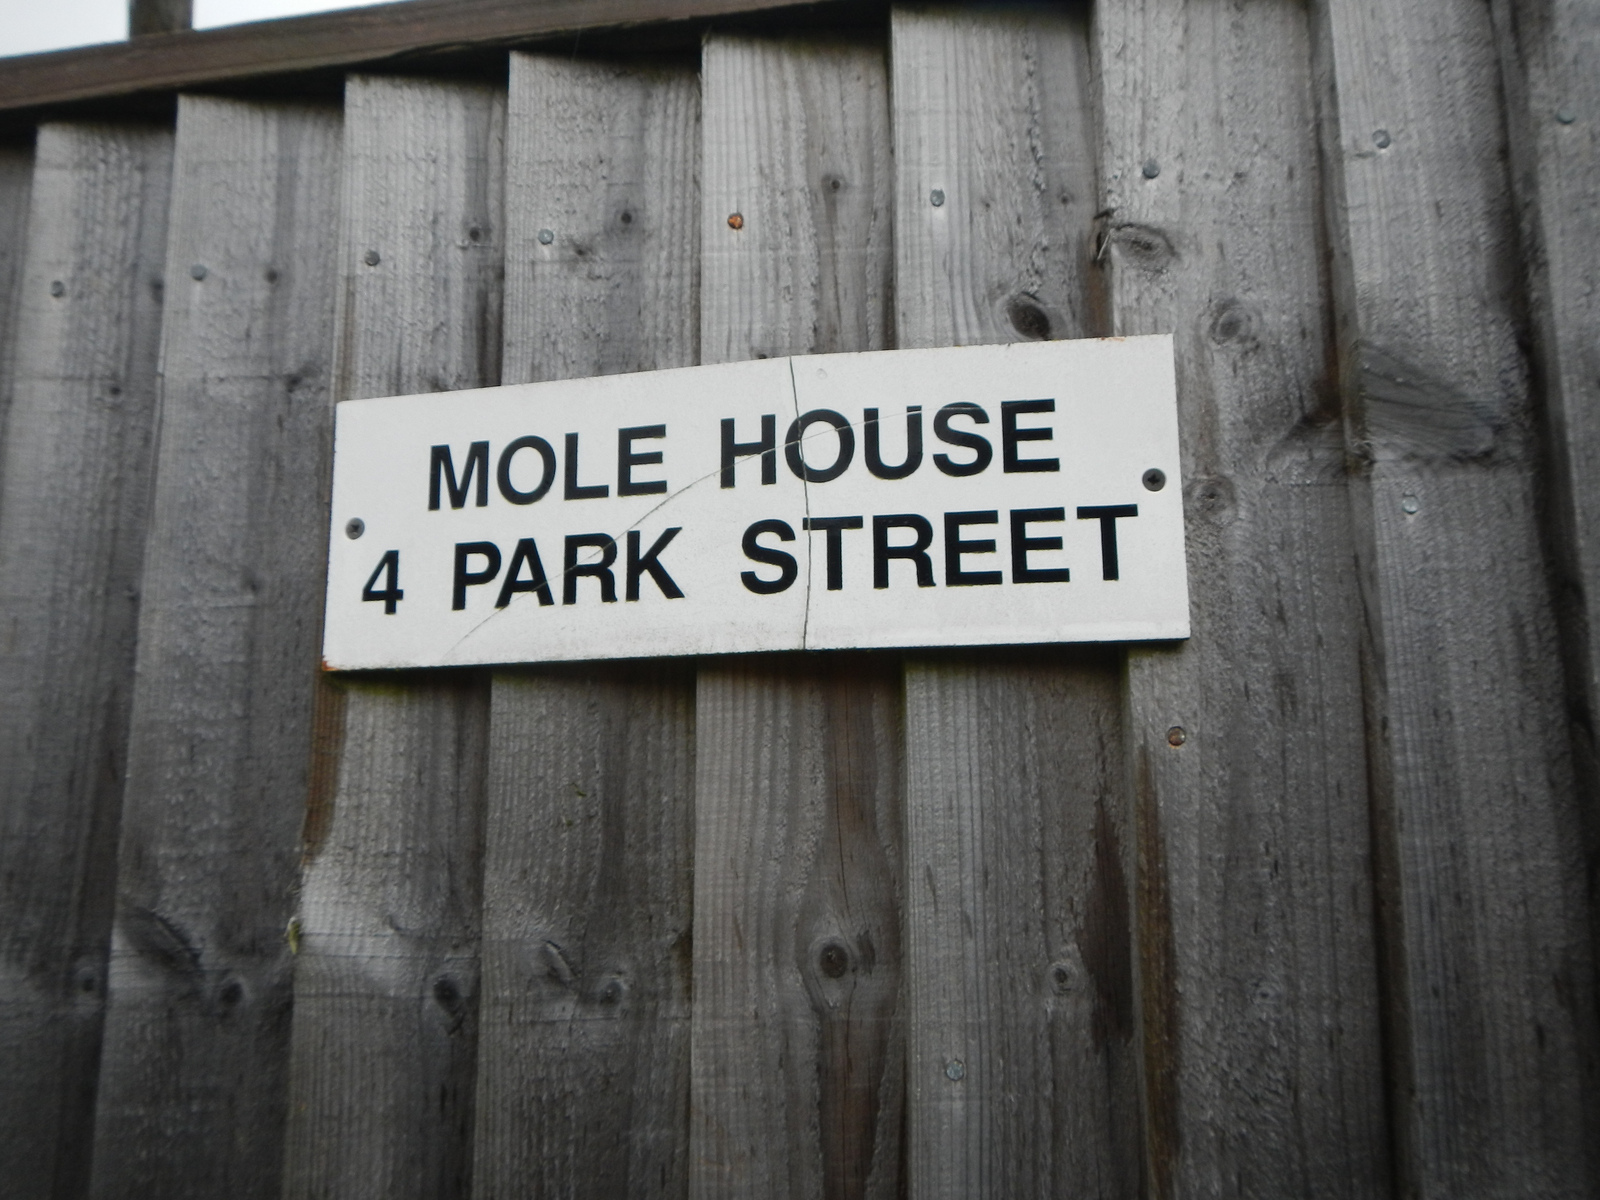  ​i want to live in "Mole House". I also learned all about mole holes on this trip. 